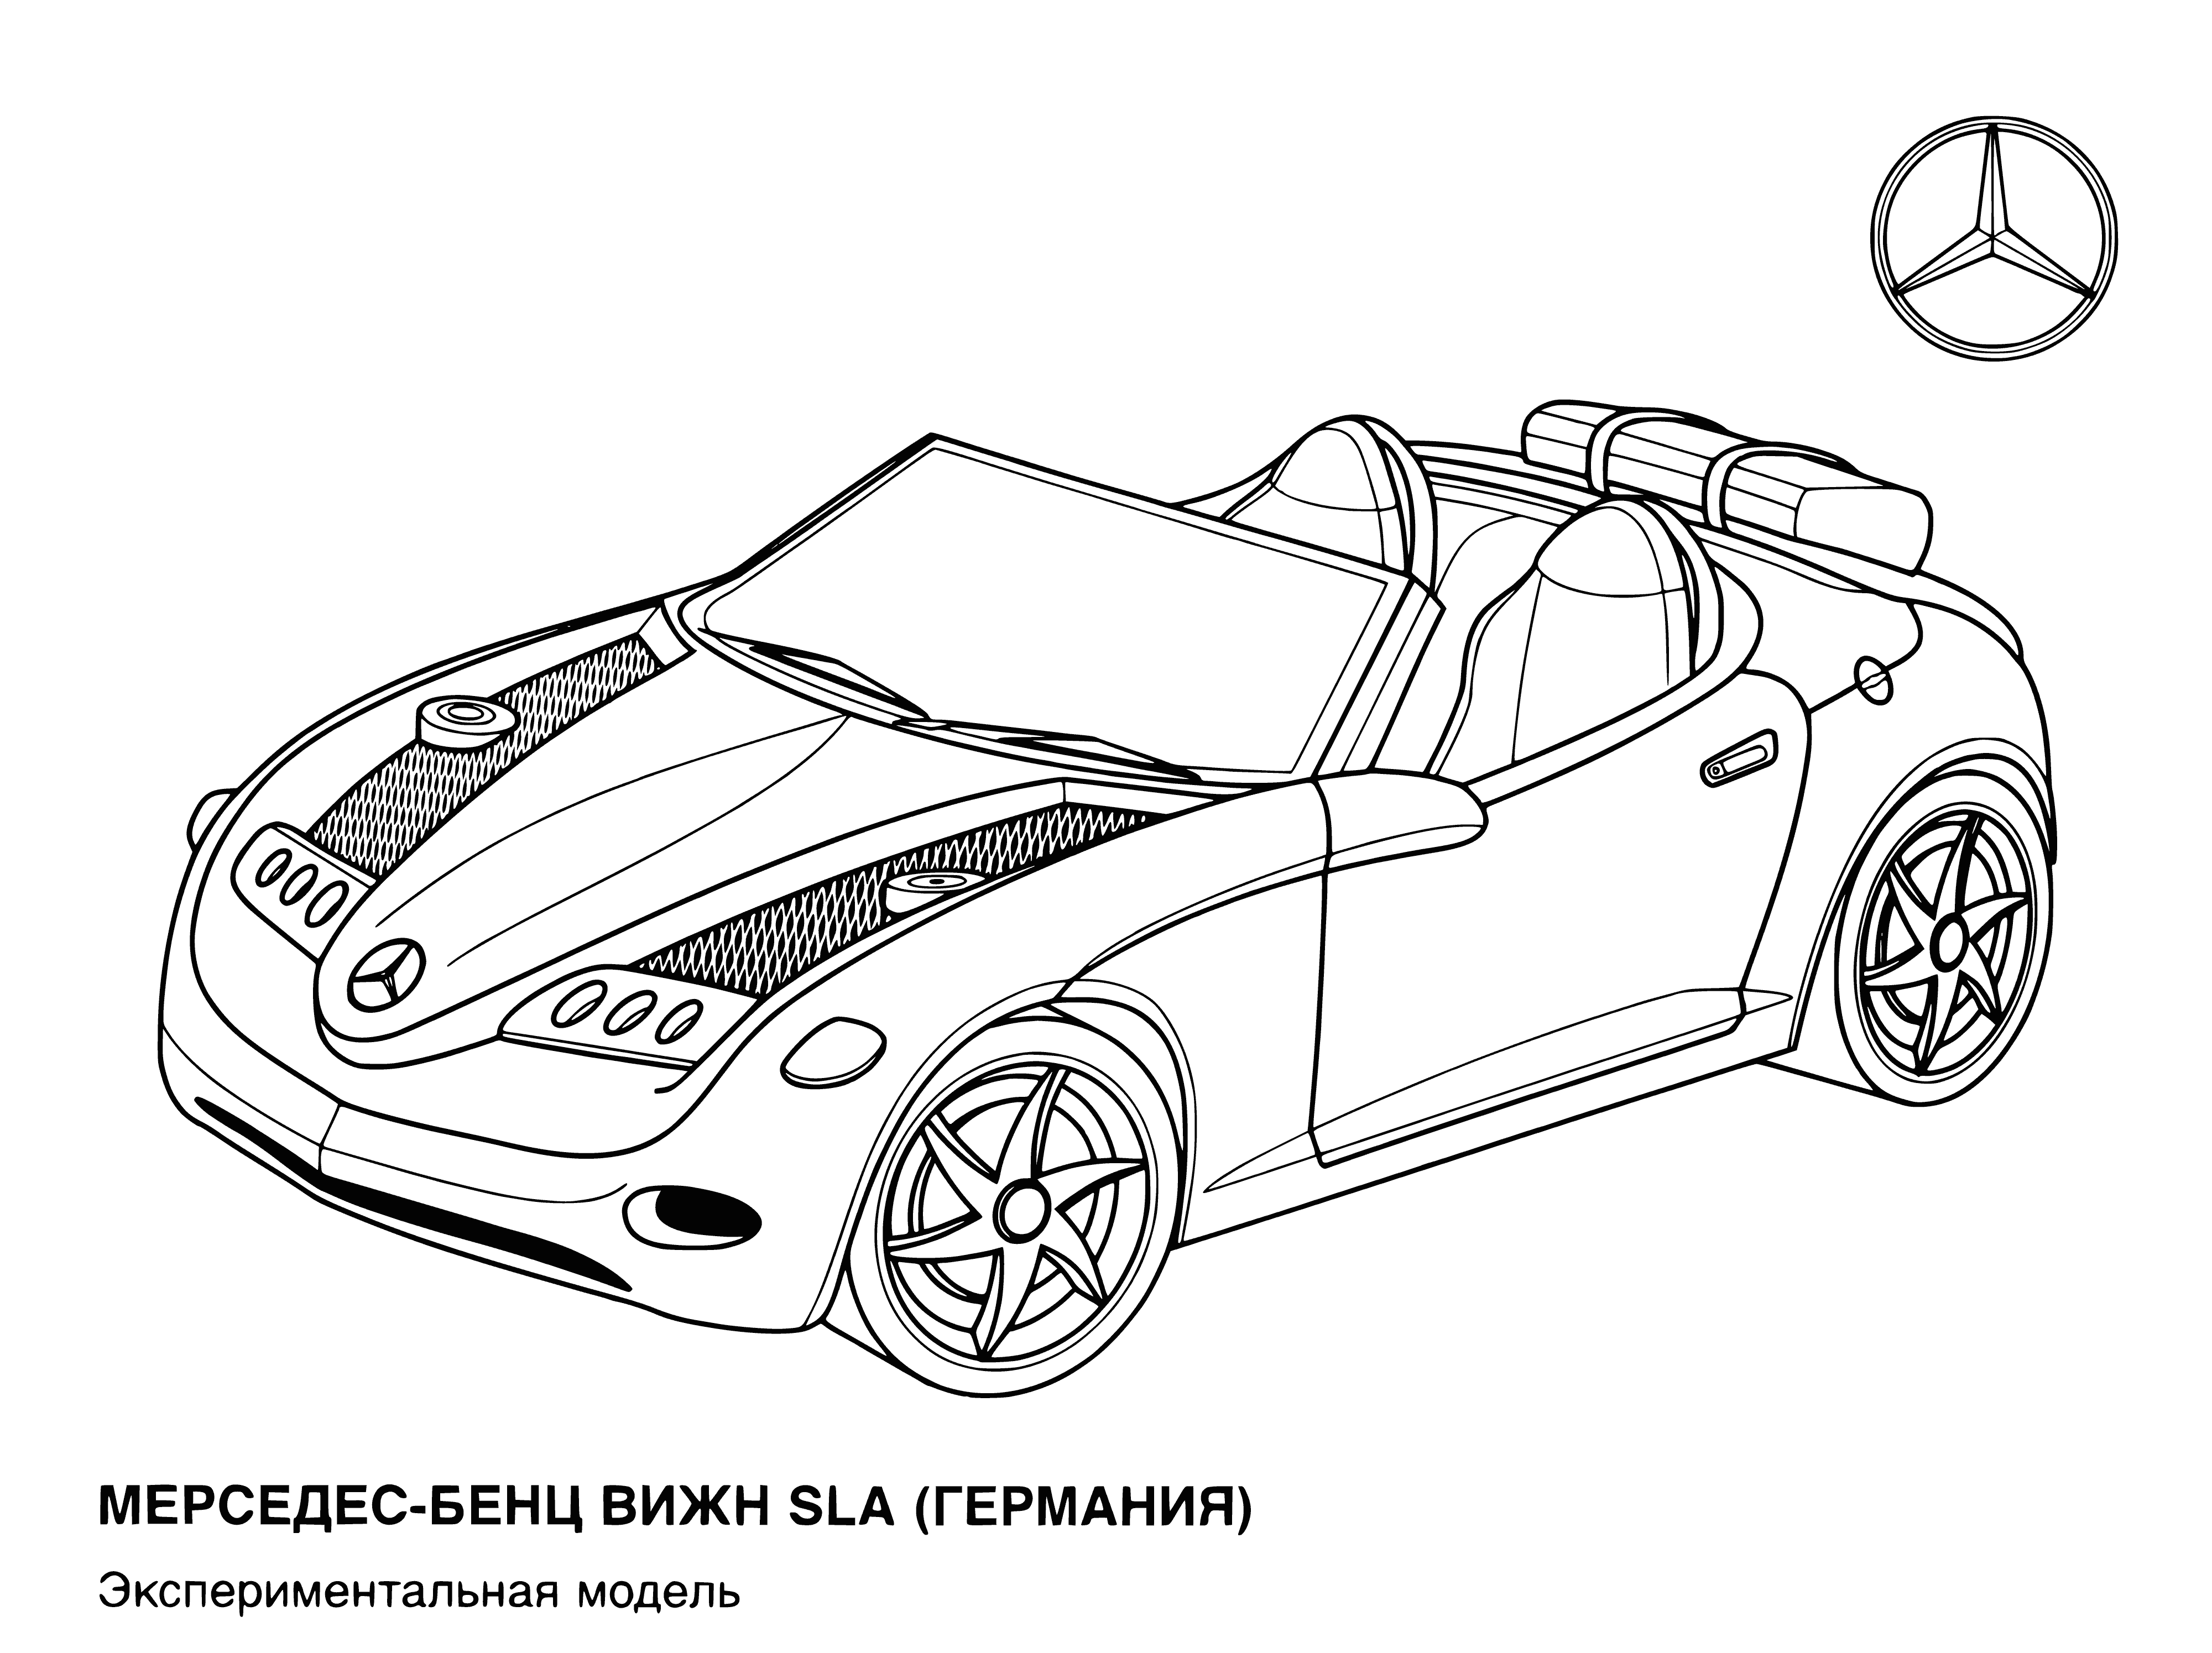 Mercedes-Benz (Germany) coloring page